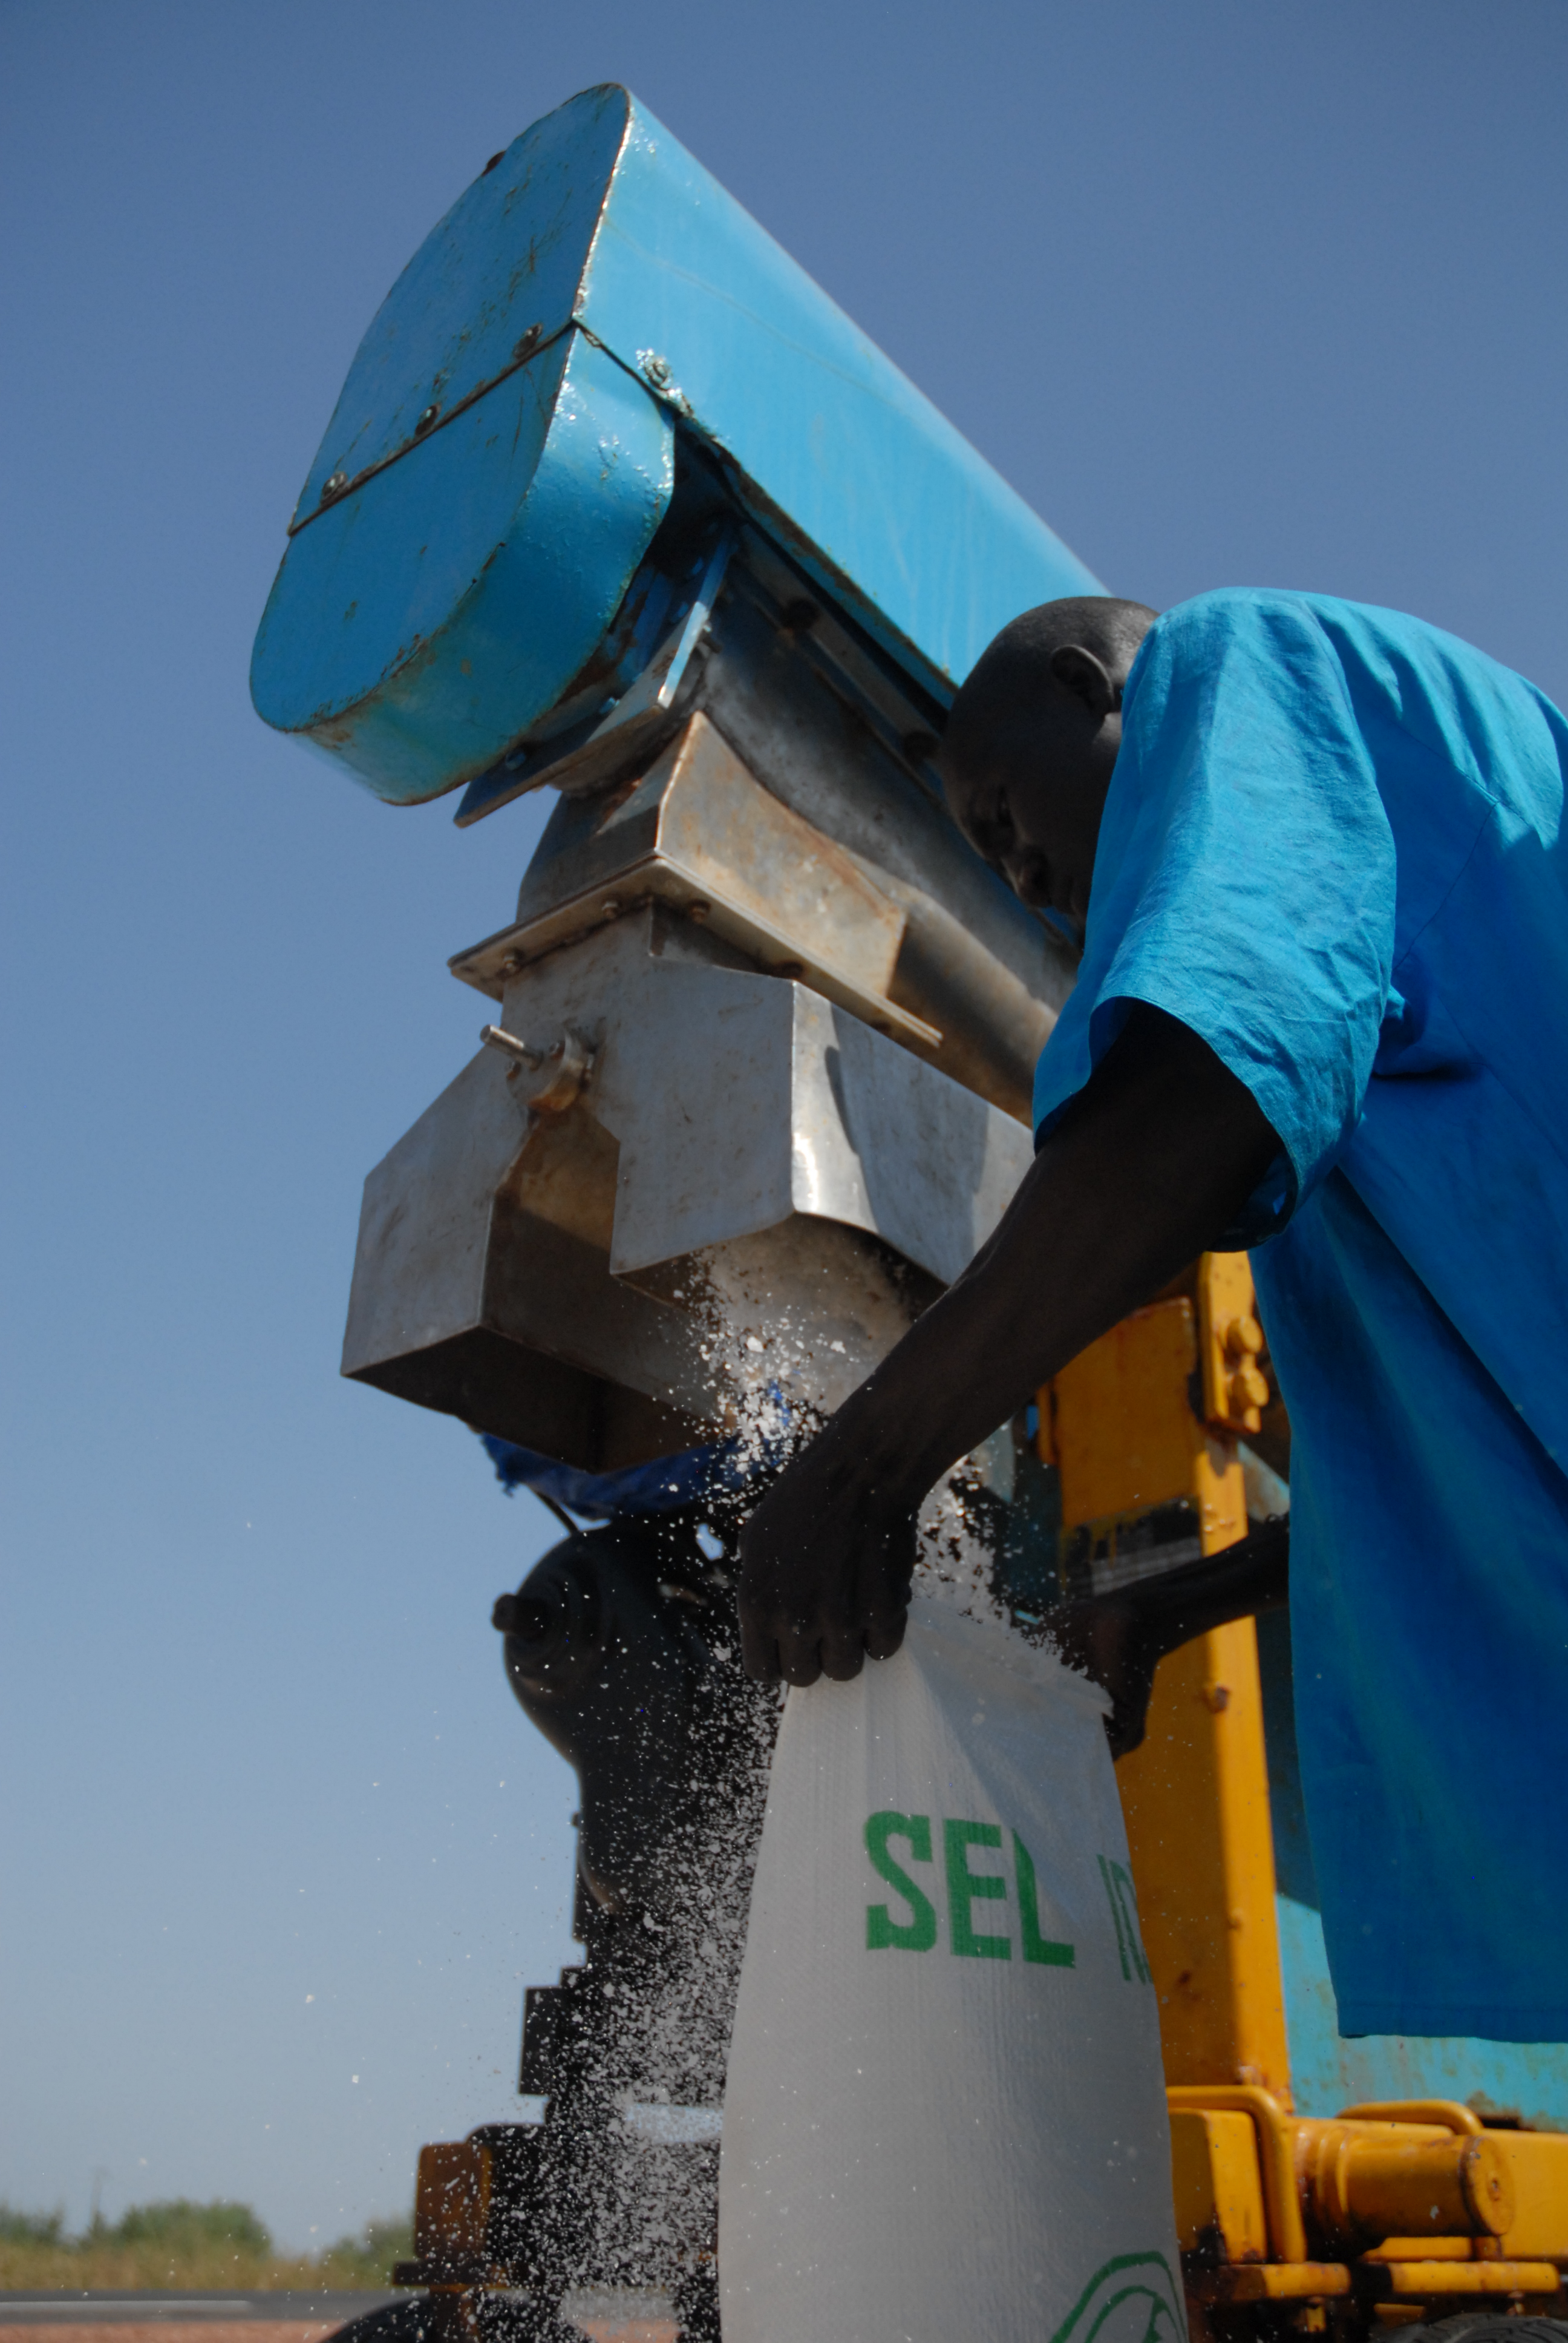 A man holds a bag under a machine outside that is filling it with iodized salt.